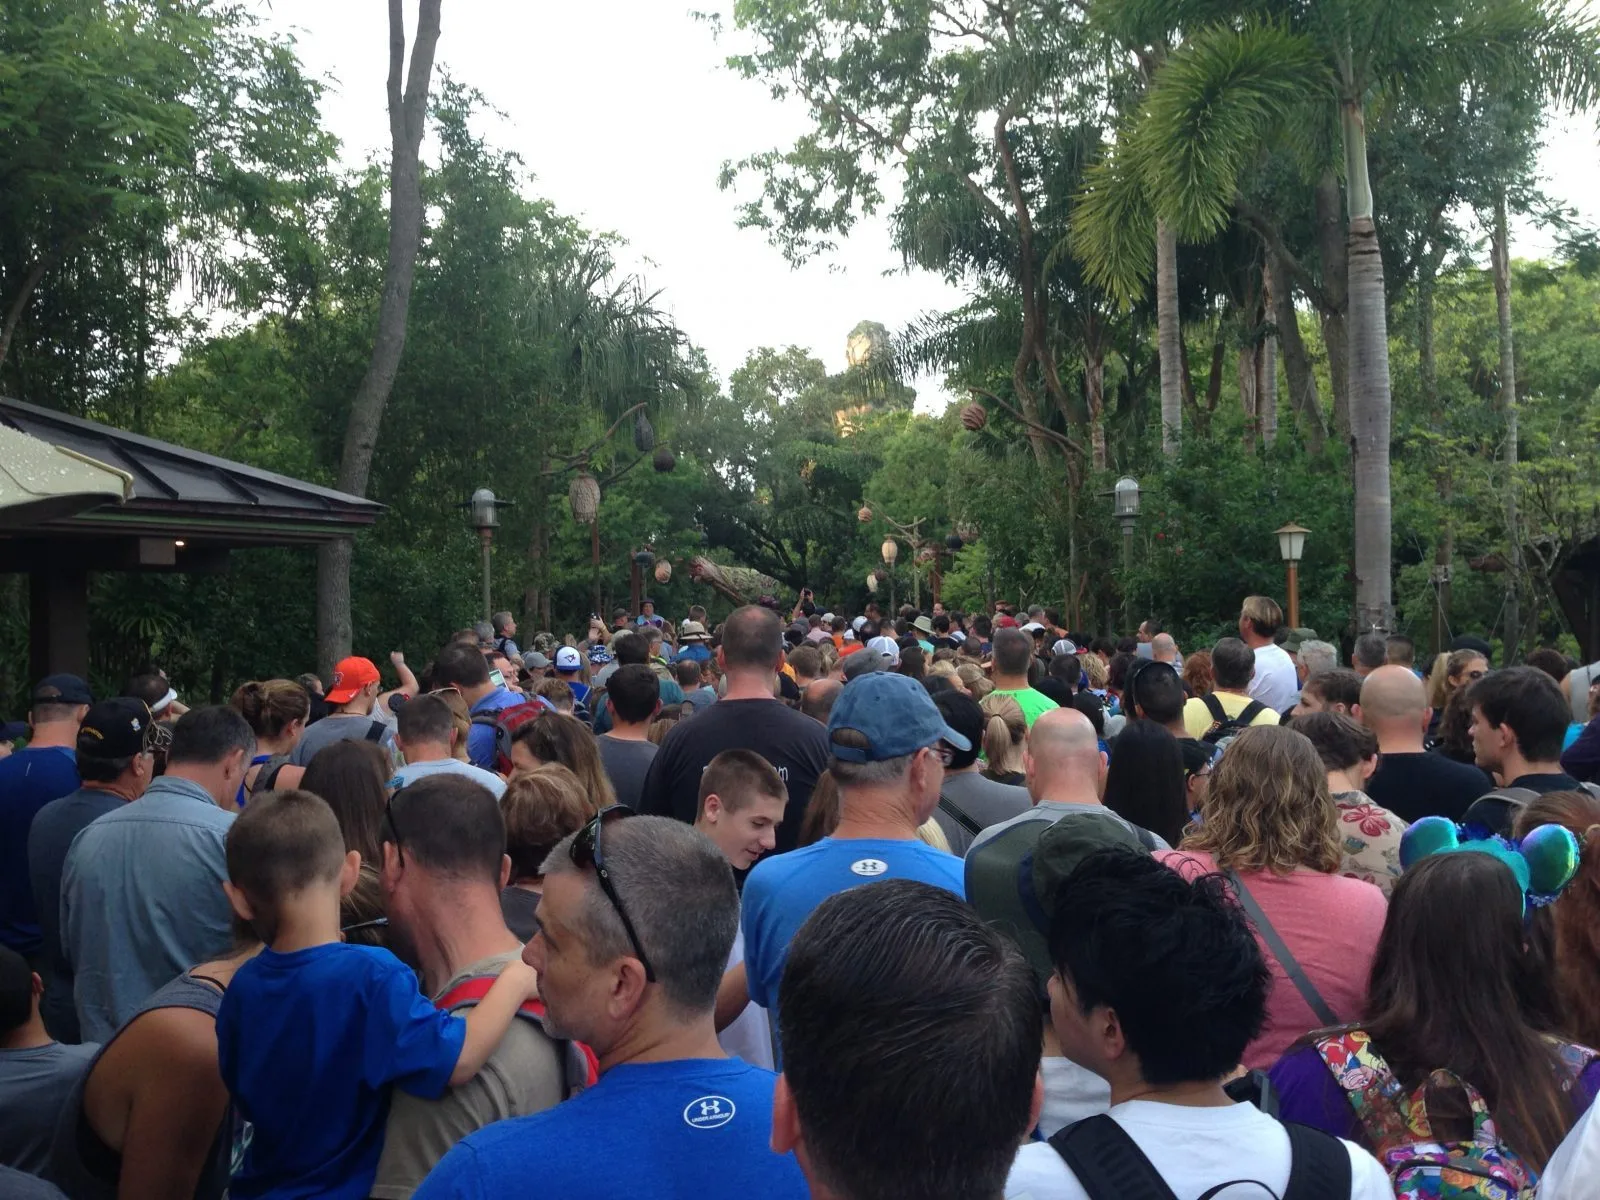 crowd of people trying to get into Pandora after it opened